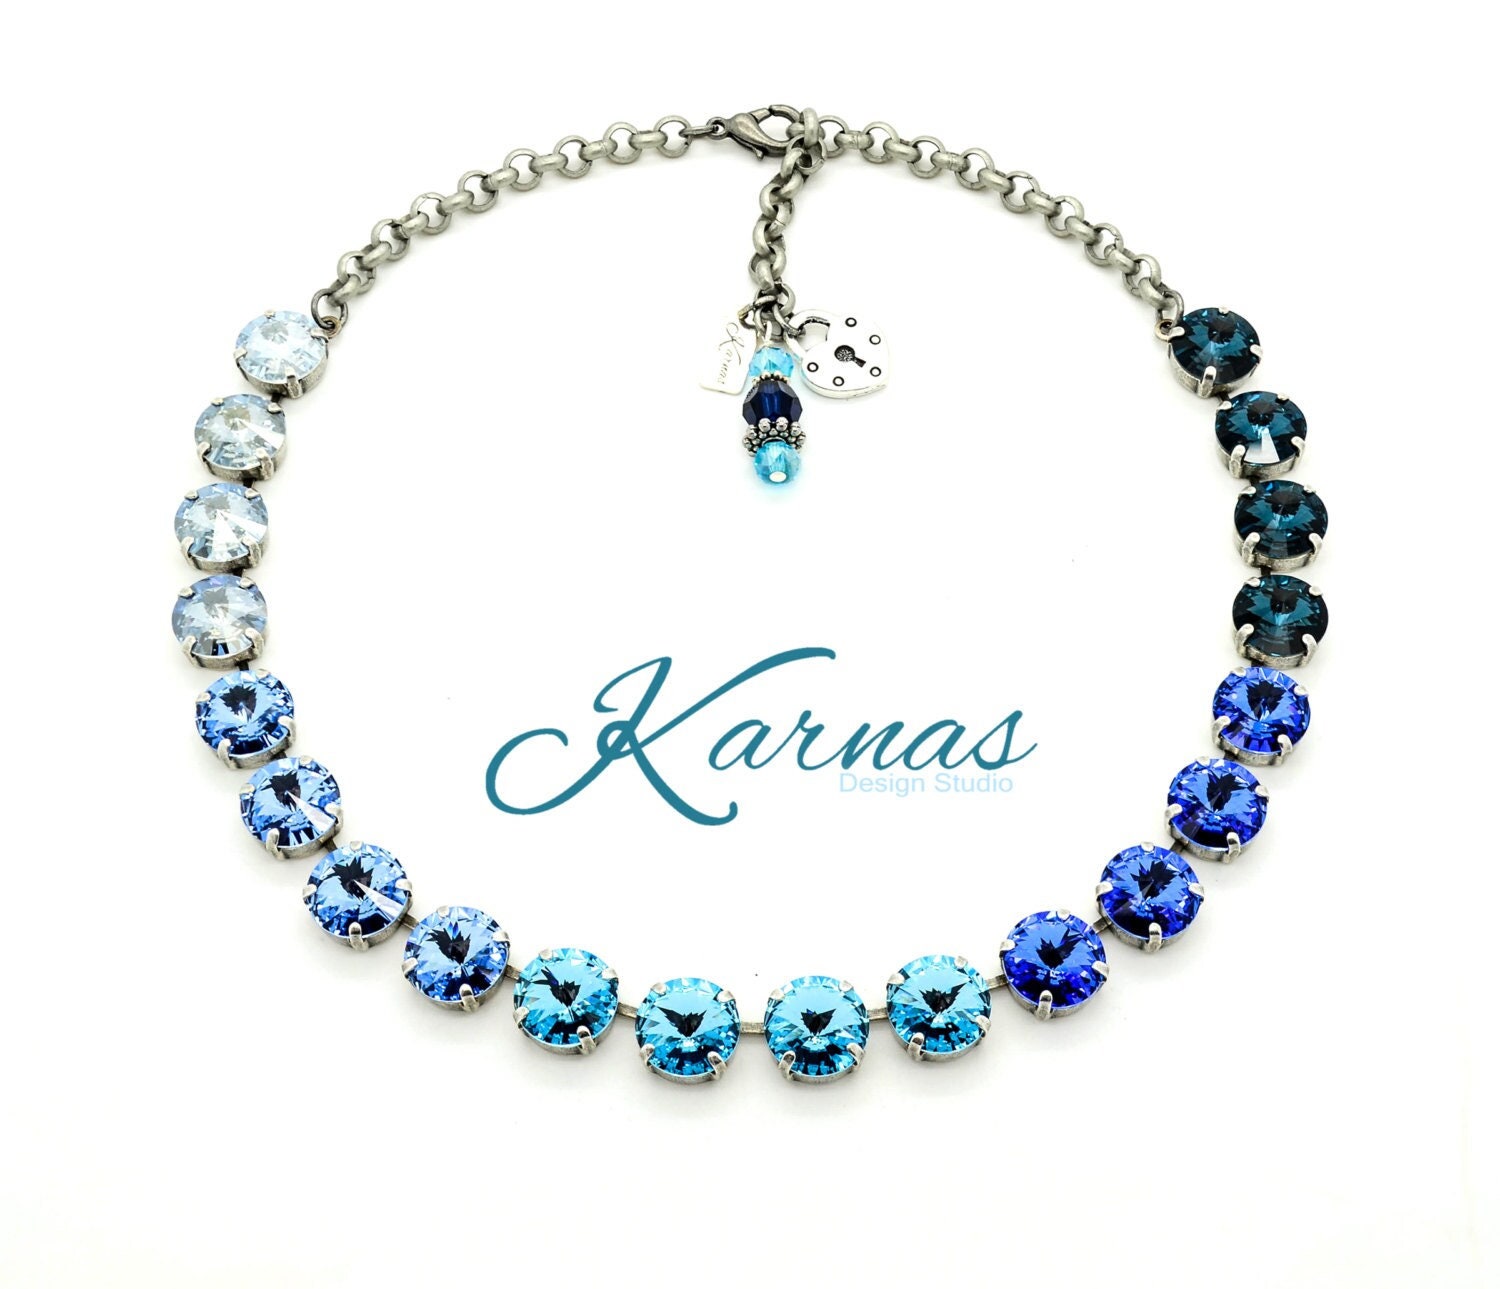 Blue Ombre Swirl 12mm Necklace Made With K.d.s. Premium Crystal Pick Your Finish Karnas Design Studio Free Shipping